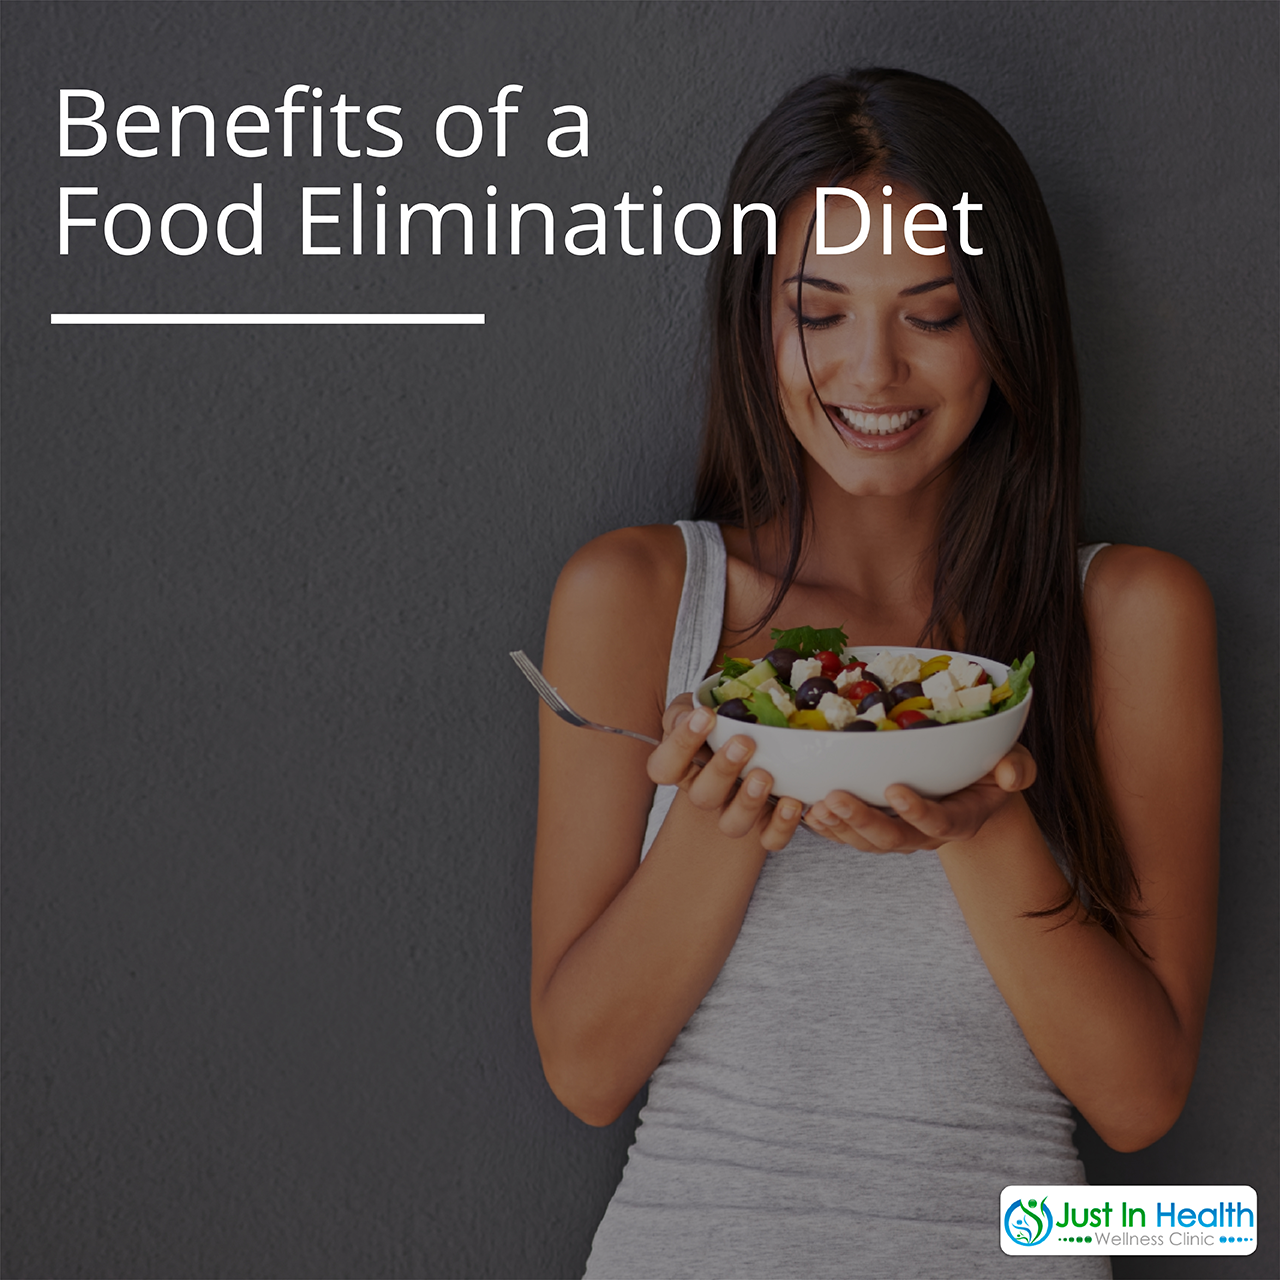 What are the benefits of a food elimination diet